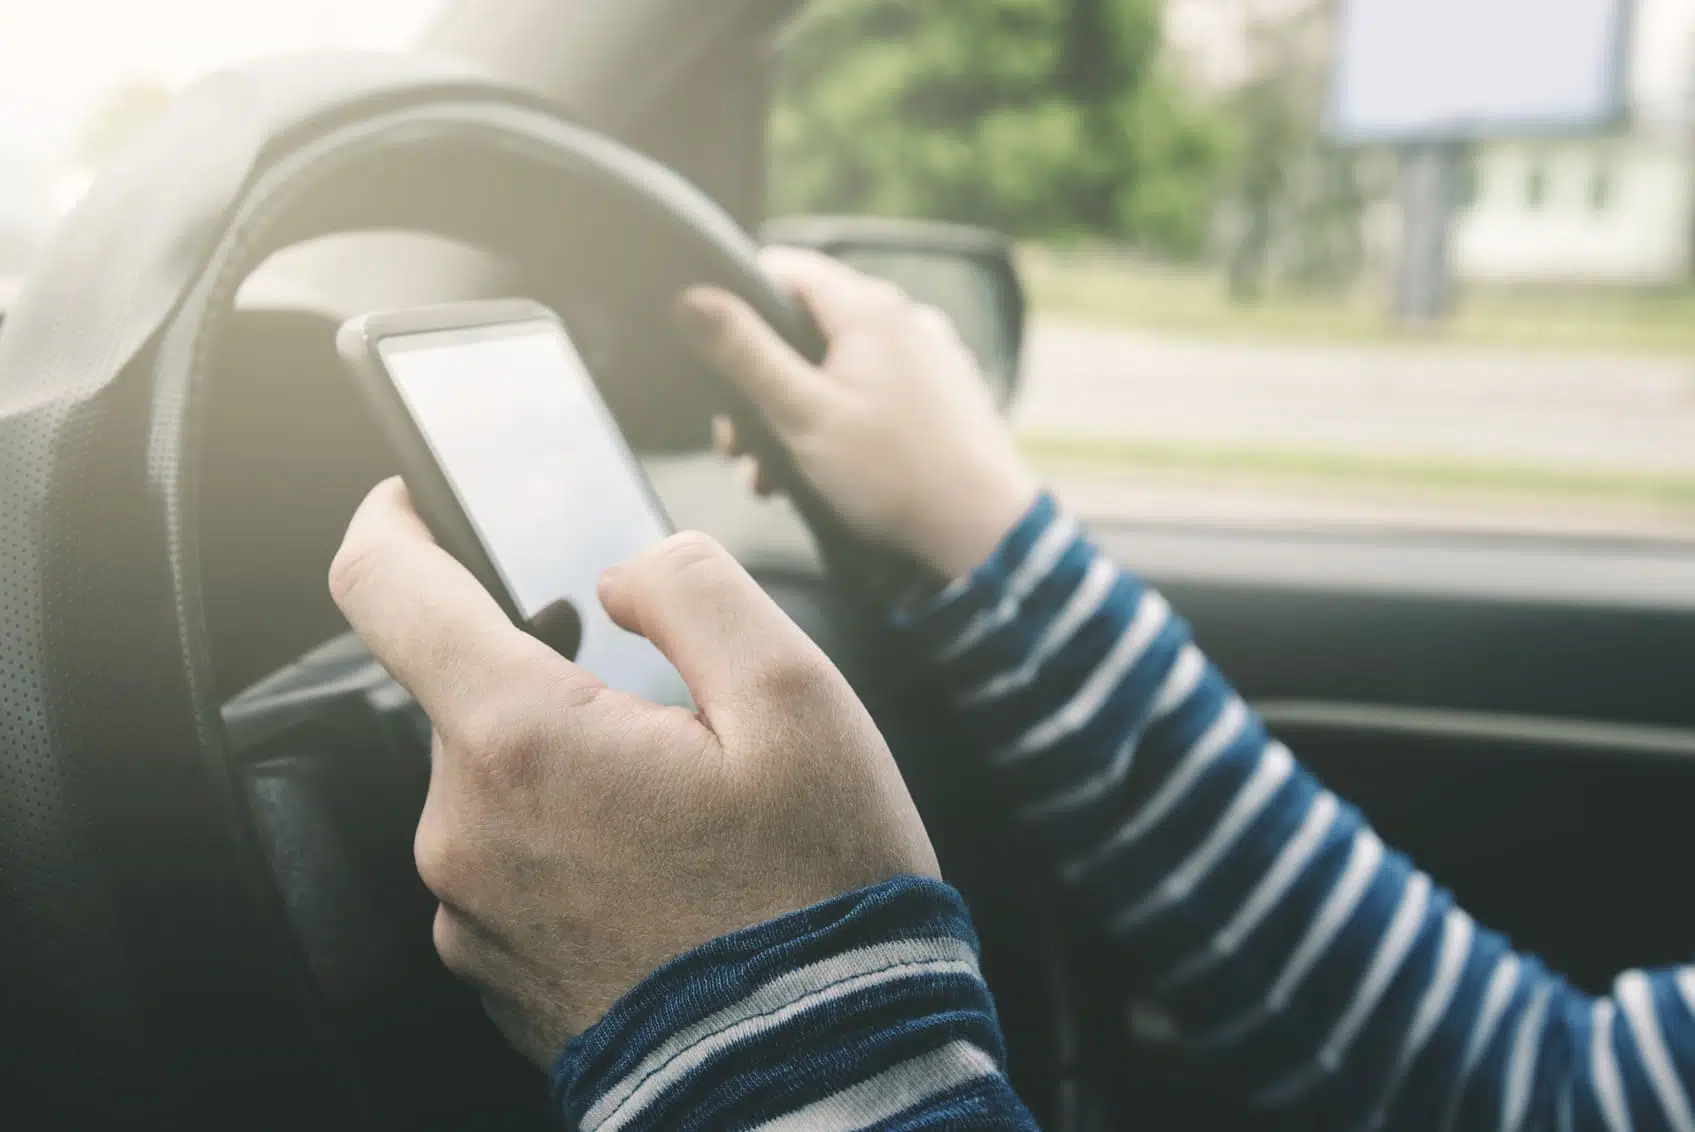 How Much Does A Texting Ticket Cost in Tampa, FL?